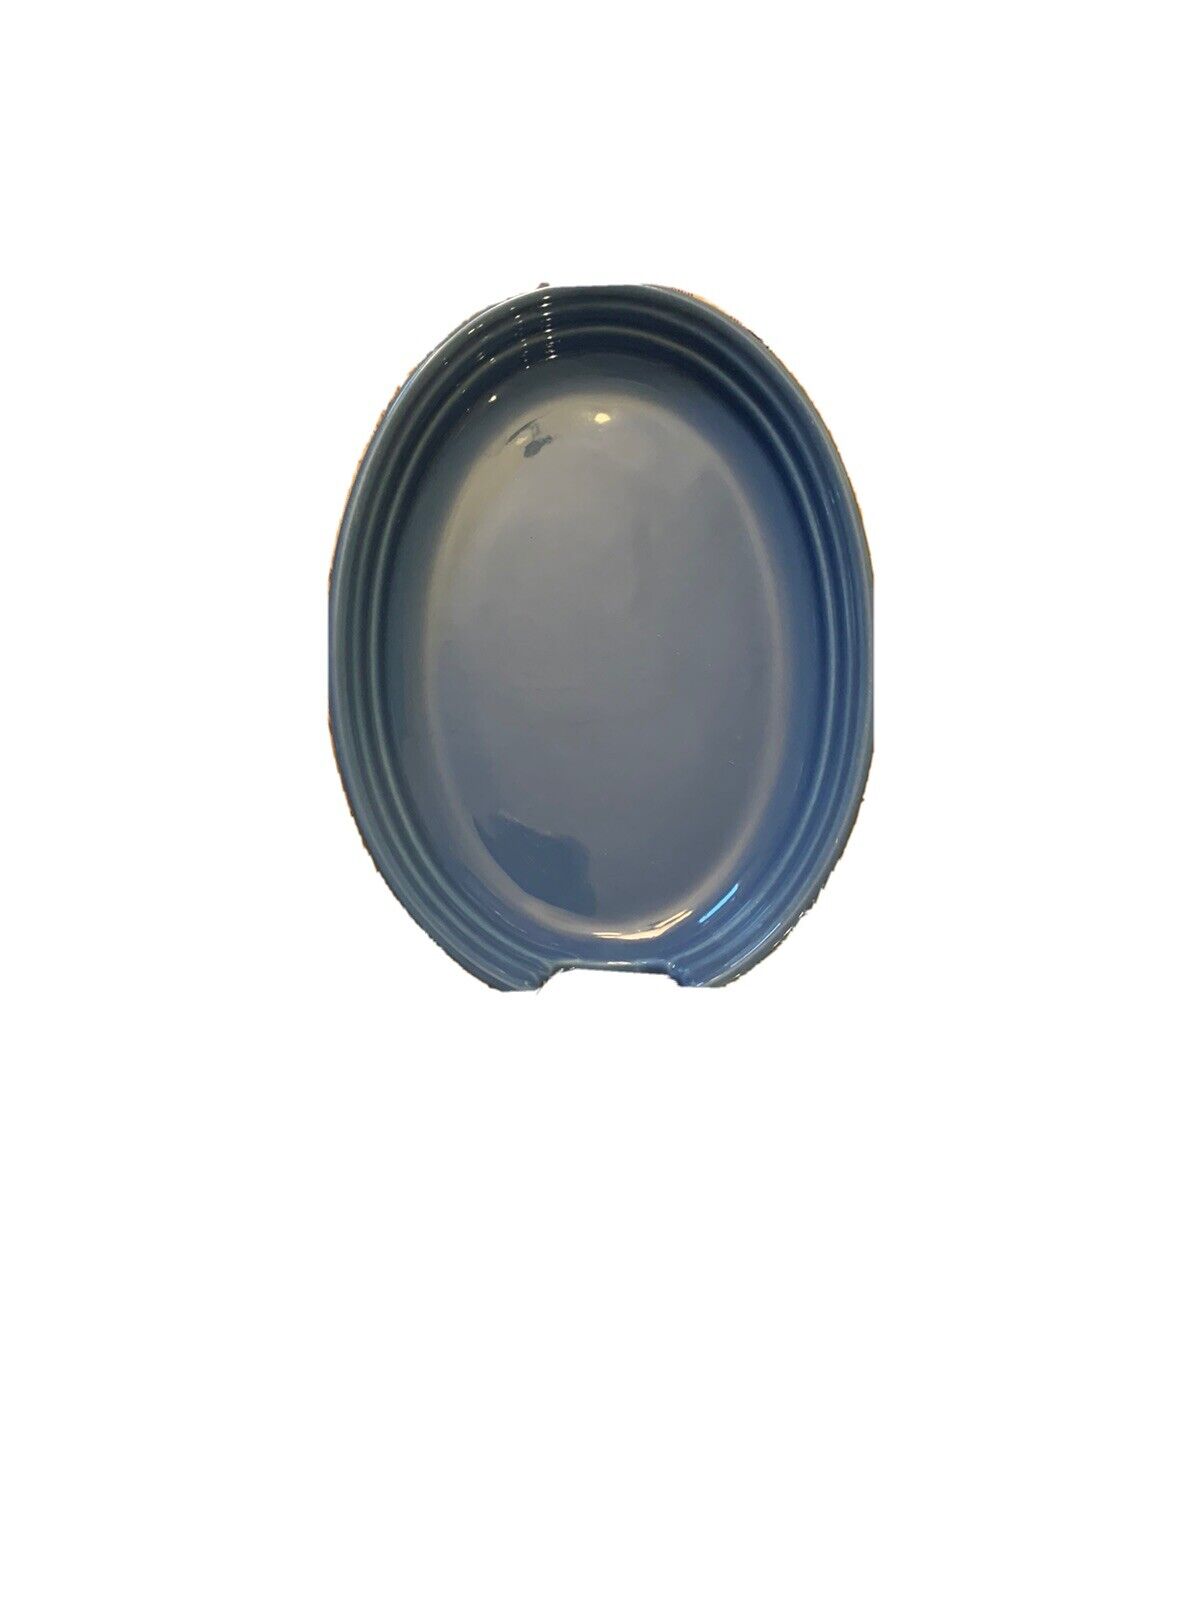 BOSCO WARE Dark Blue Spoon Rest Slotted, Warehoused New in Late 1990's